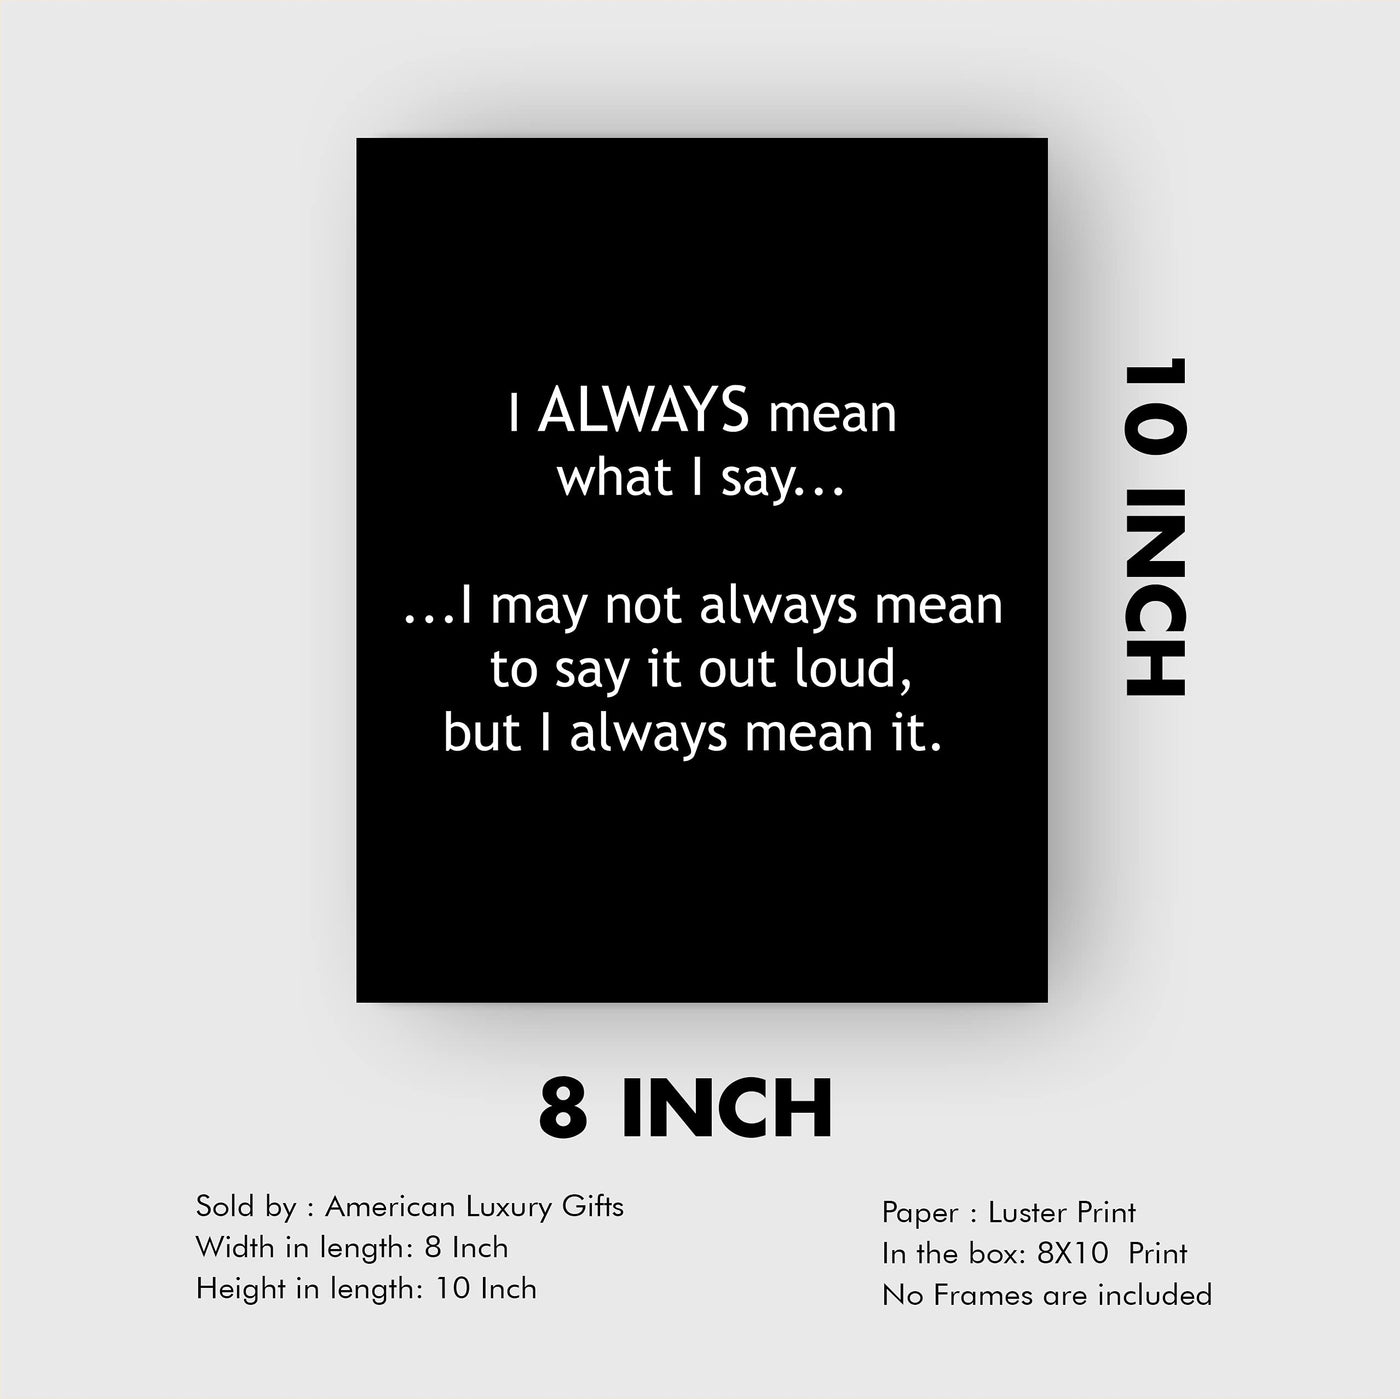 Mean What I Say-May Not Always Mean to Say It Out Loud Funny Wall Sign -8 x 10" Sarcastic Art Print-Ready to Frame. Humorous Home-Office-Bar-Shop-Cave Decor. Great Desk Sign-Fun Novelty Gift!